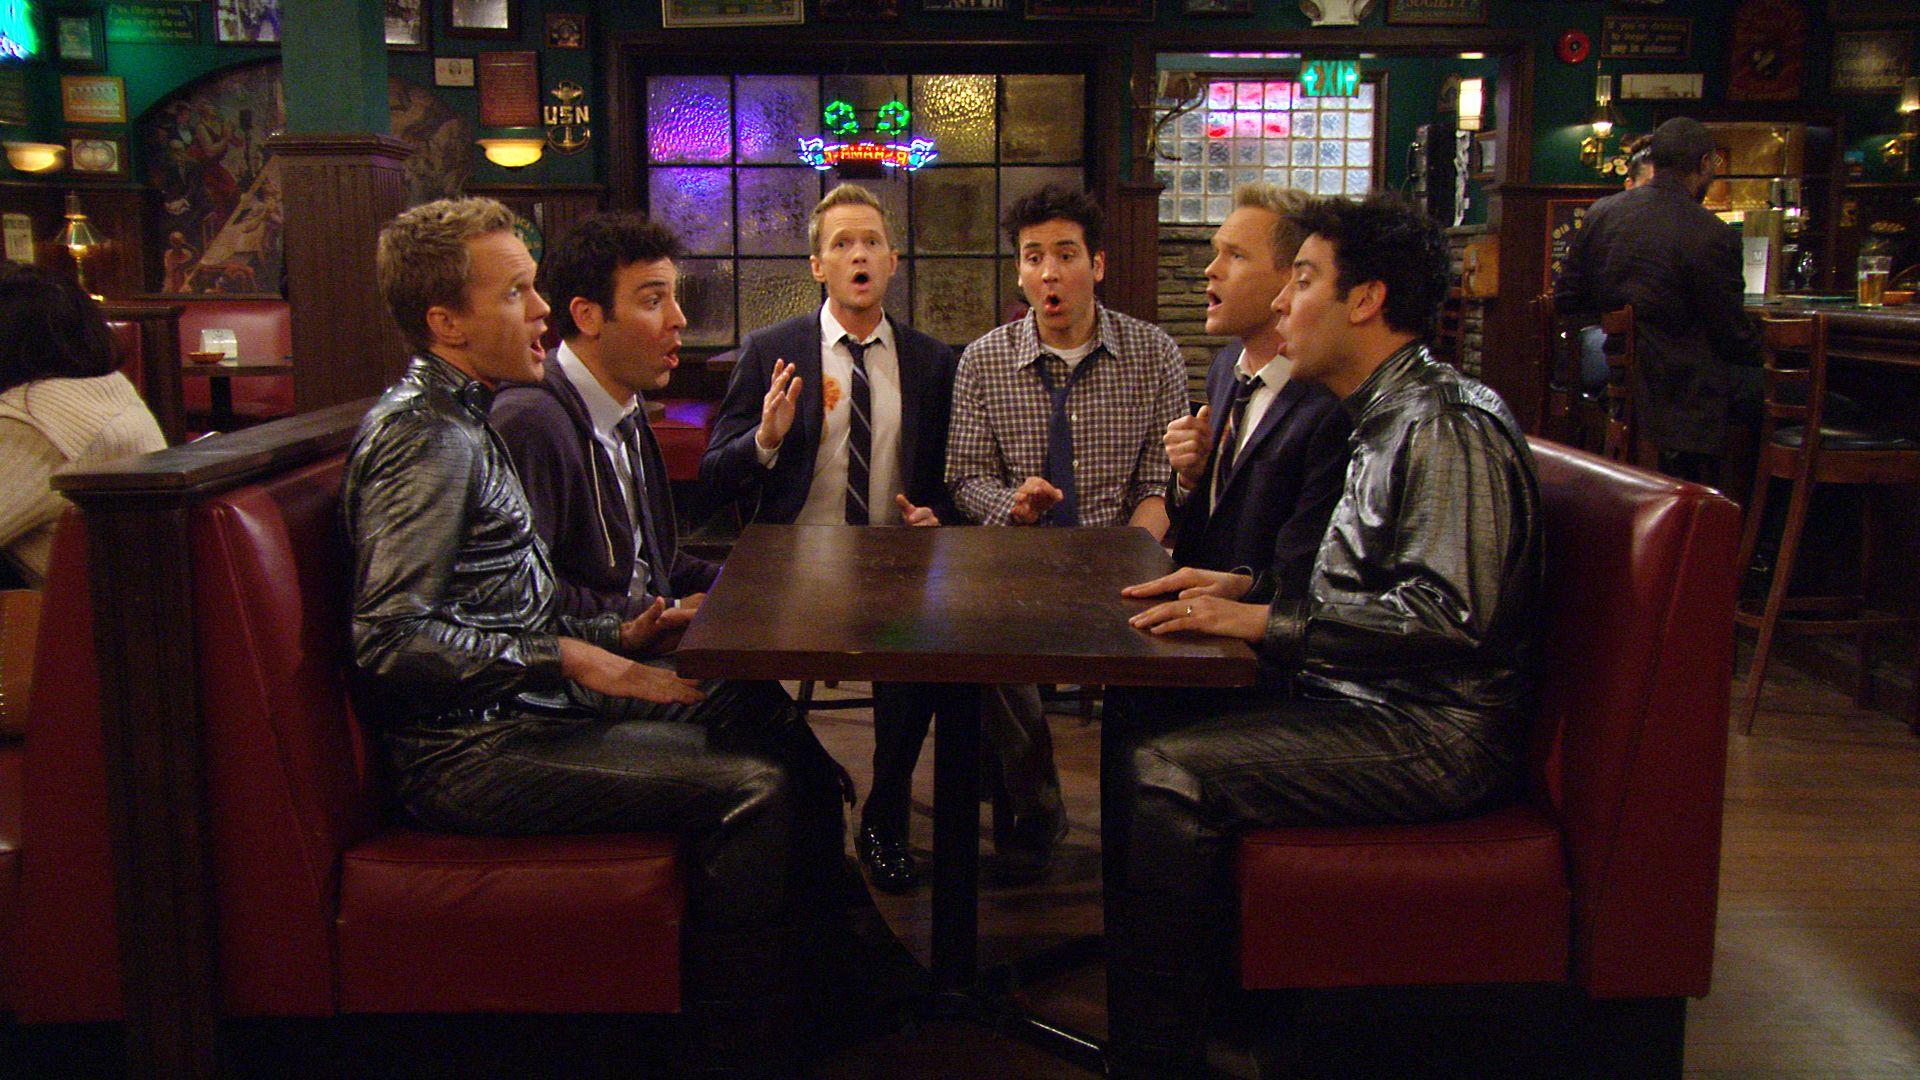 How I Met Your Mother The Time Travelers Review: T Minus 45 Days